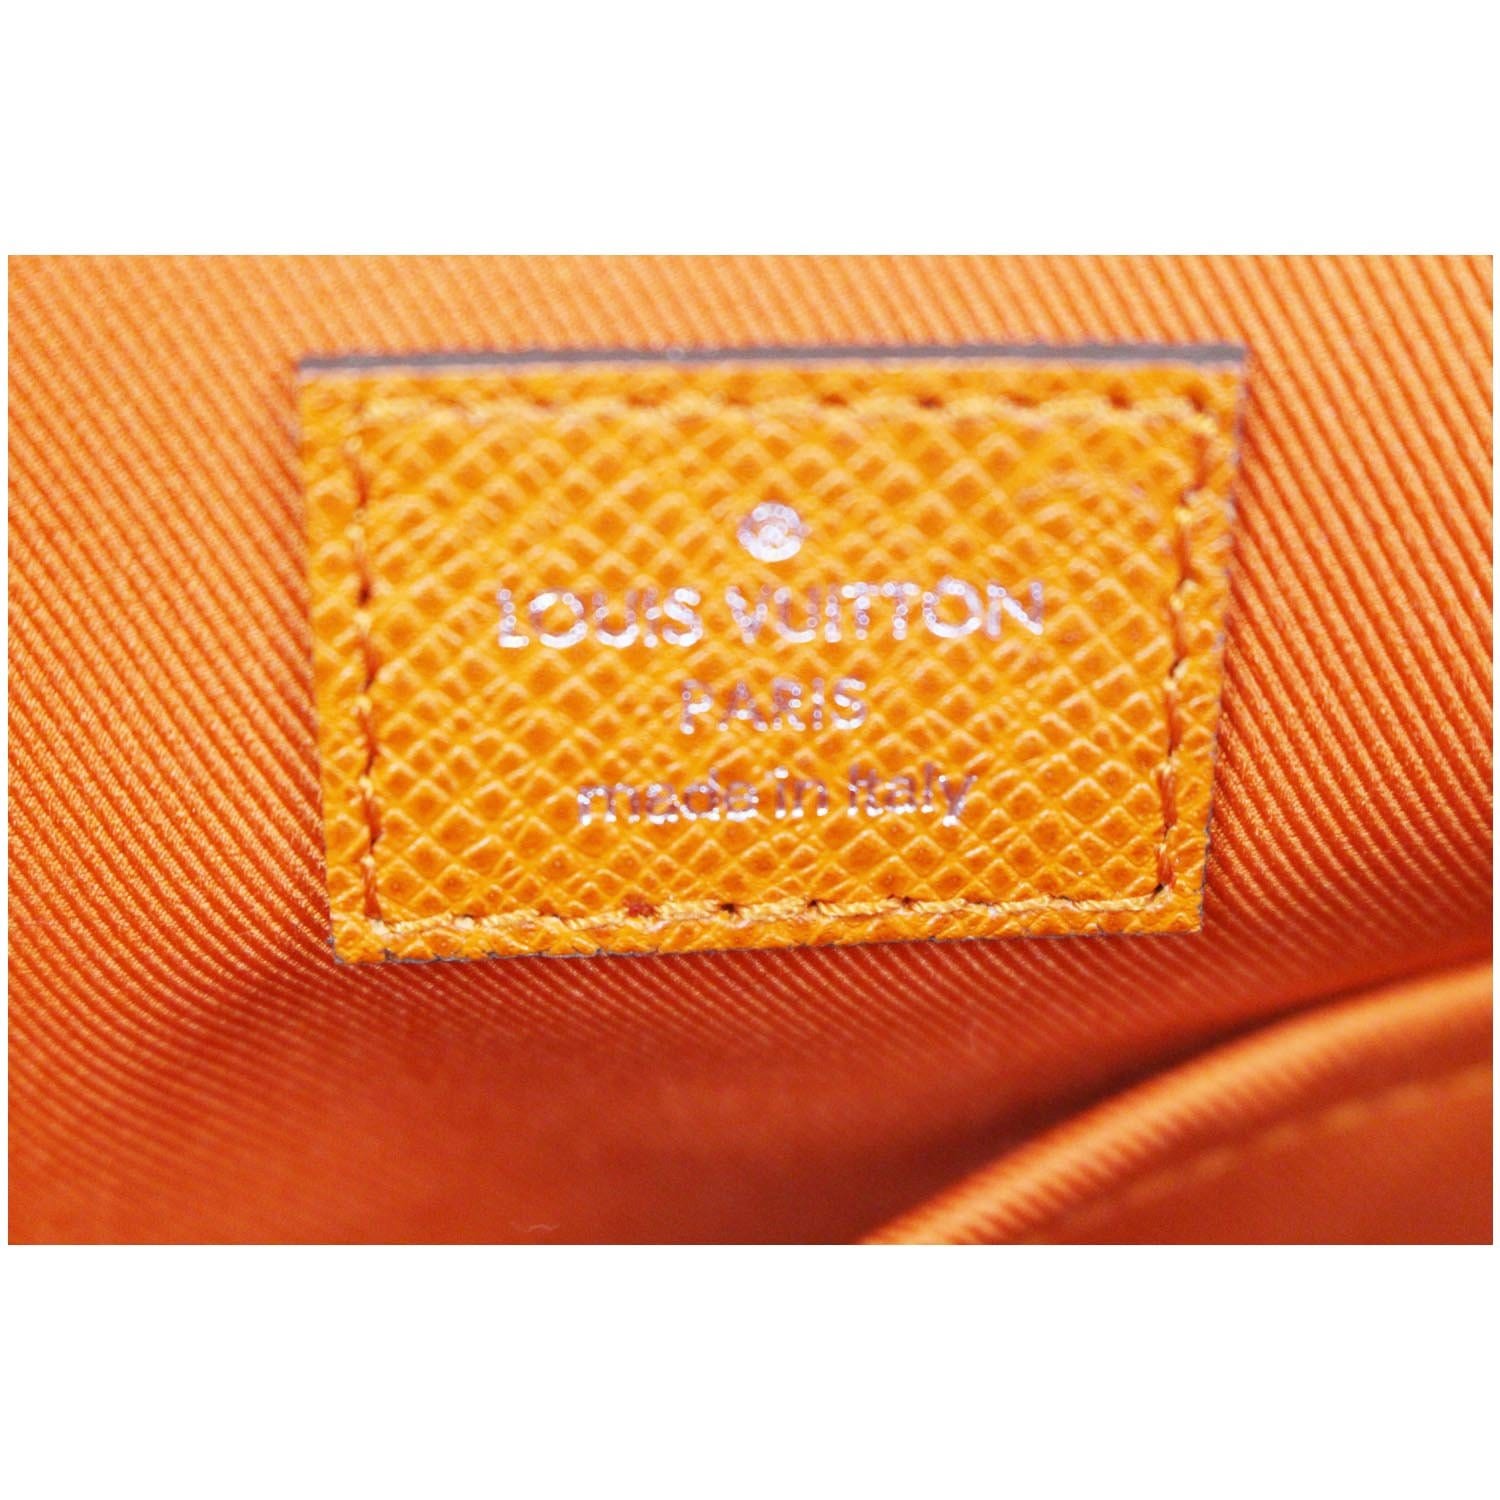 Louis Vuitton Orange Monogram Coated Canvas and Taiga Leather Taigarama Square Pouch Bag Charm Silver Hardware, 2021 (Like New)